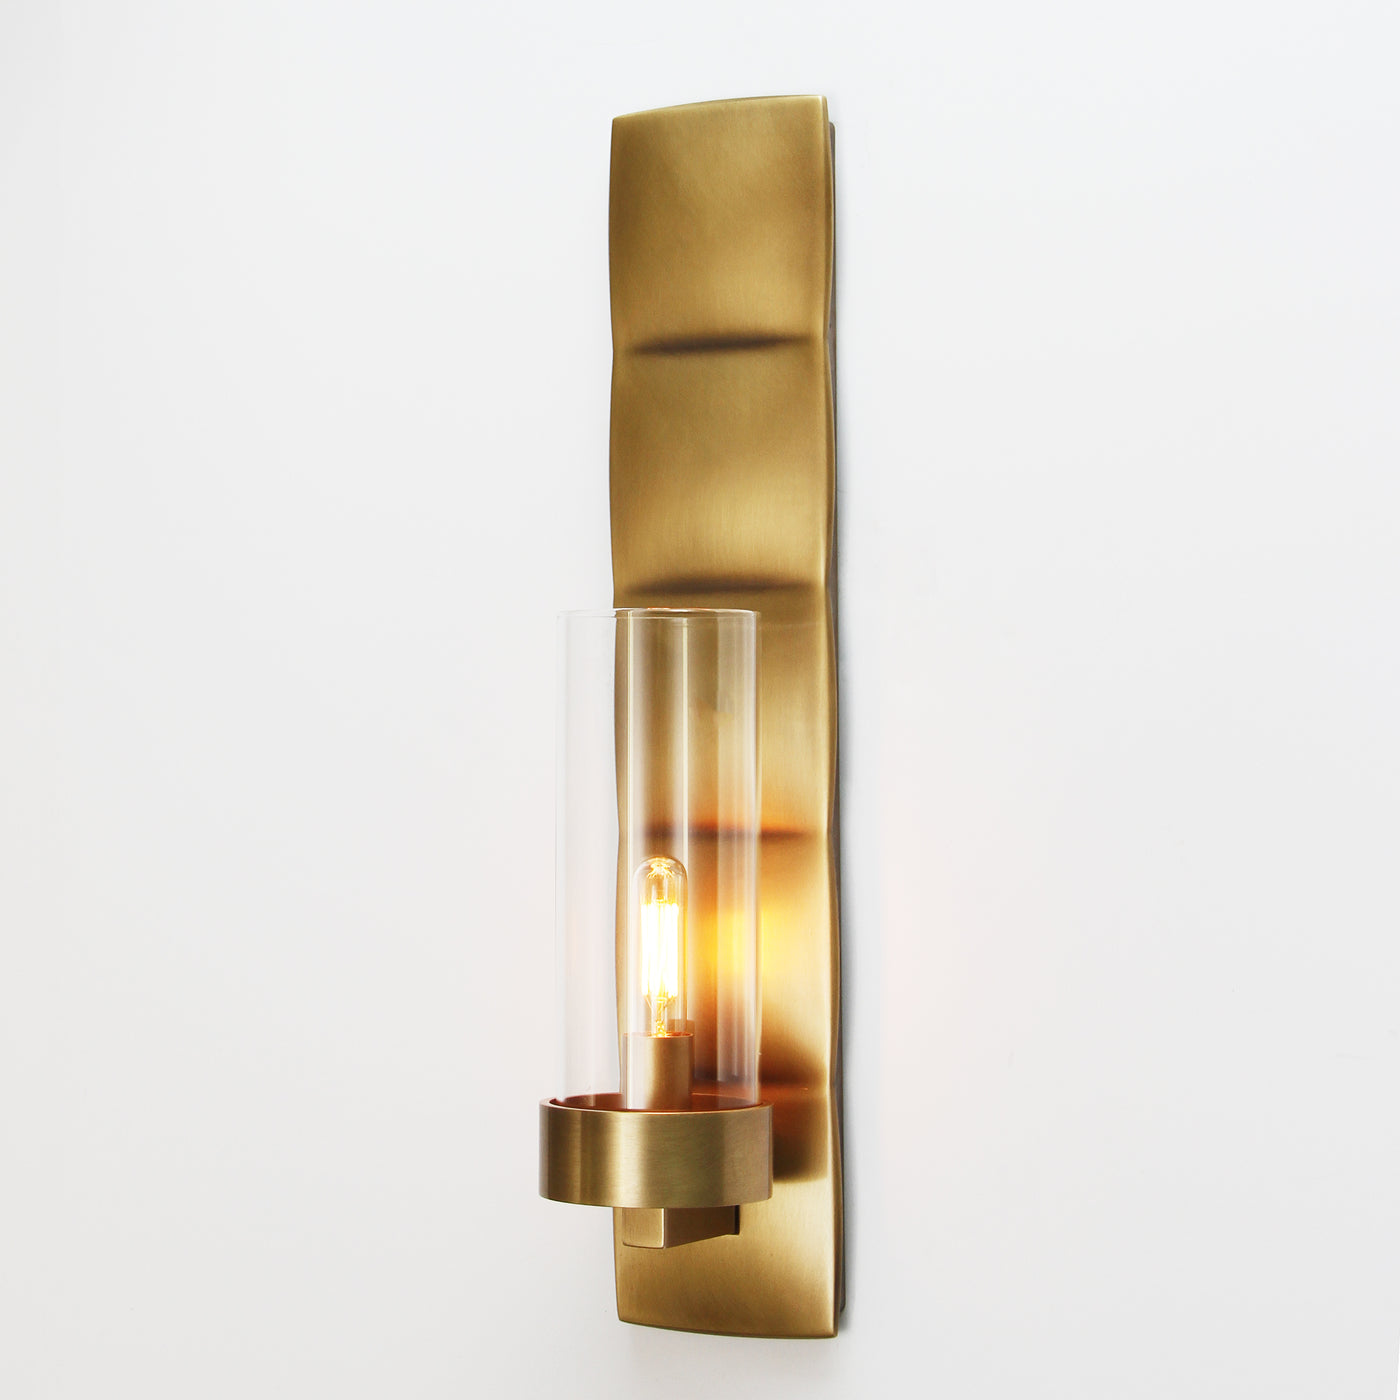 Pillowed Wall Sconce - 4017